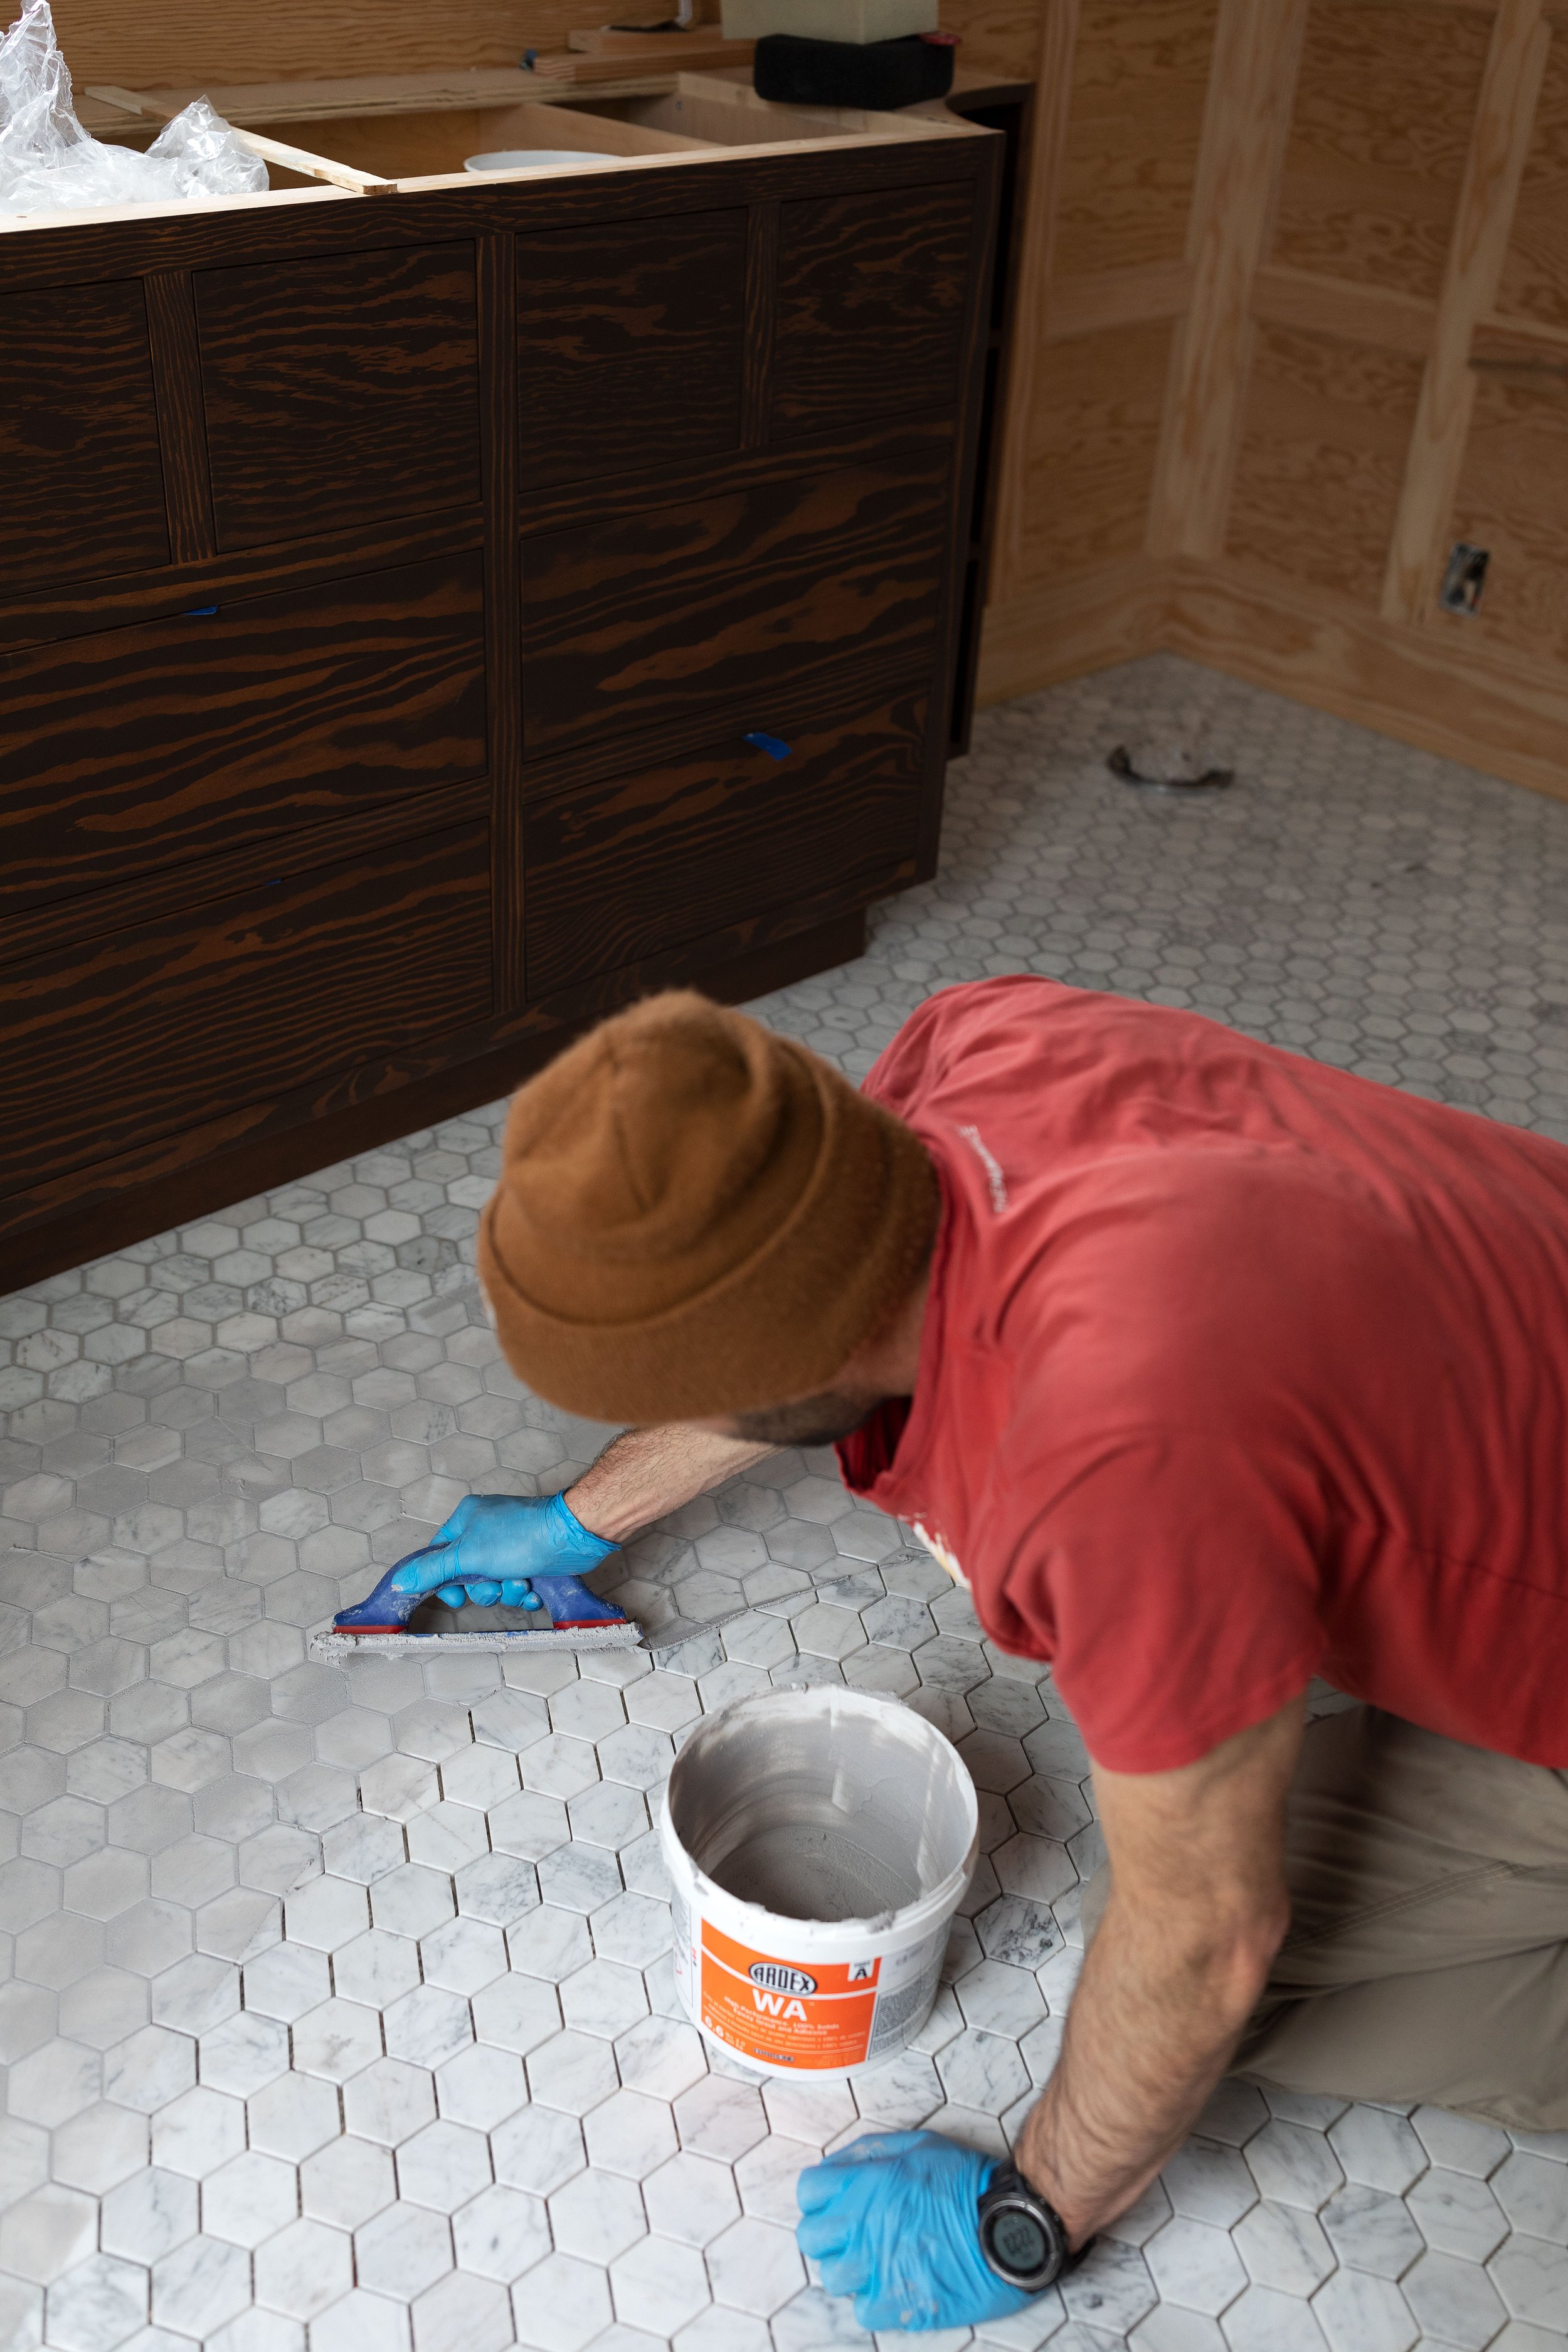 All About Epoxy Grout (Read This Before You Pick a Color!) — The